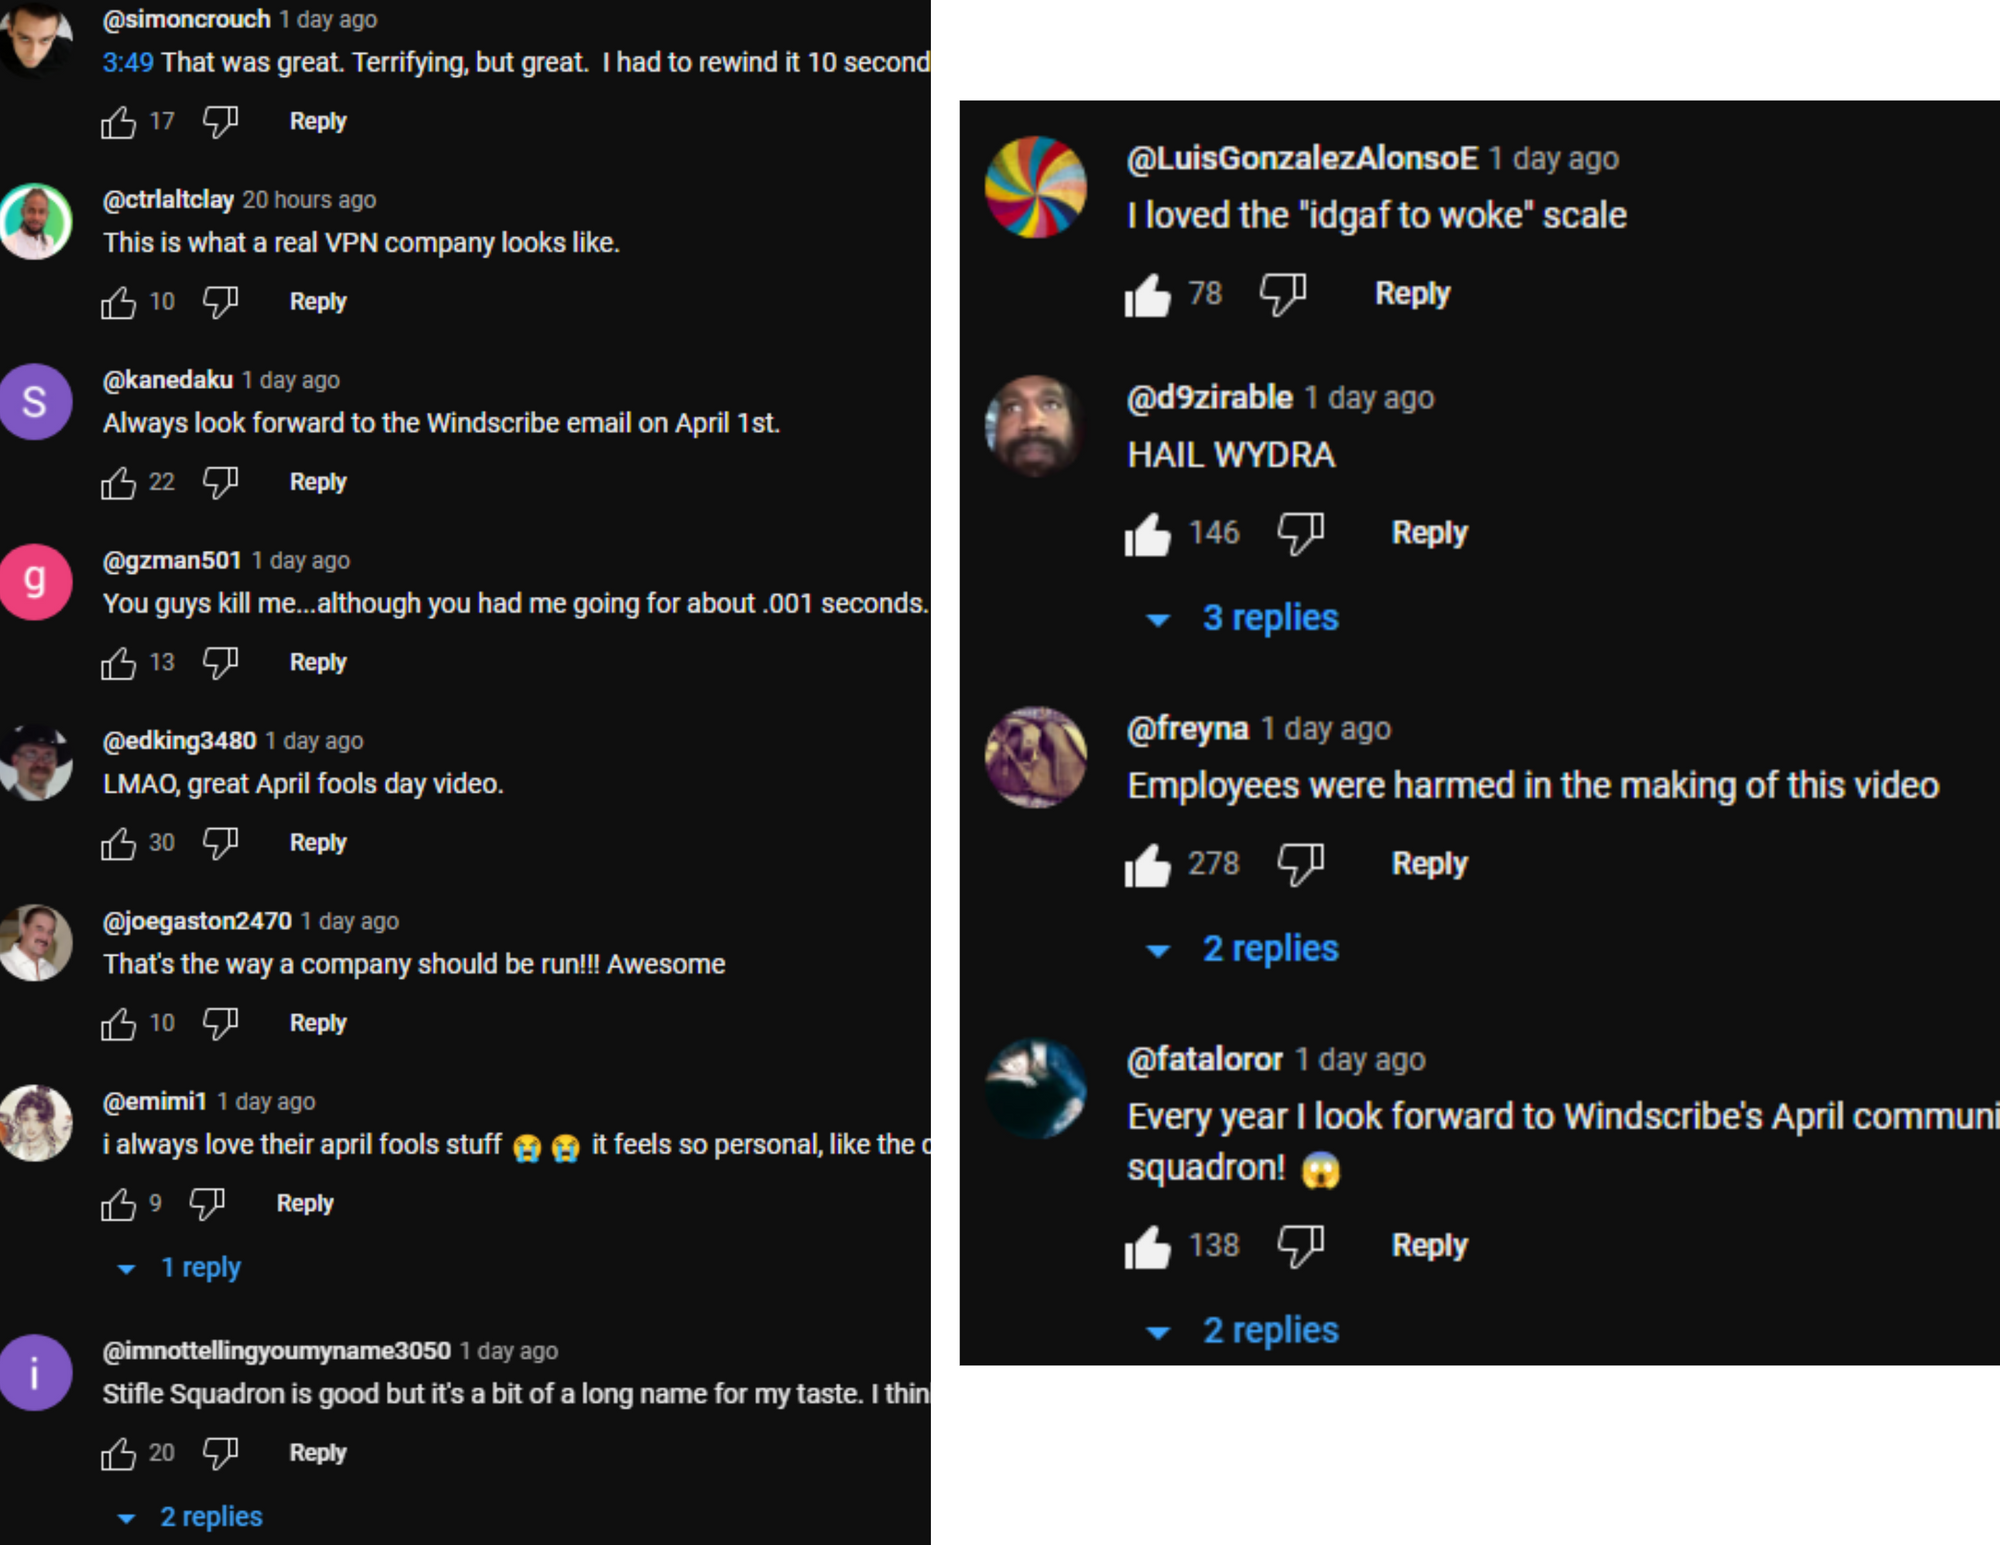 Screenshots of various praising comments from our users